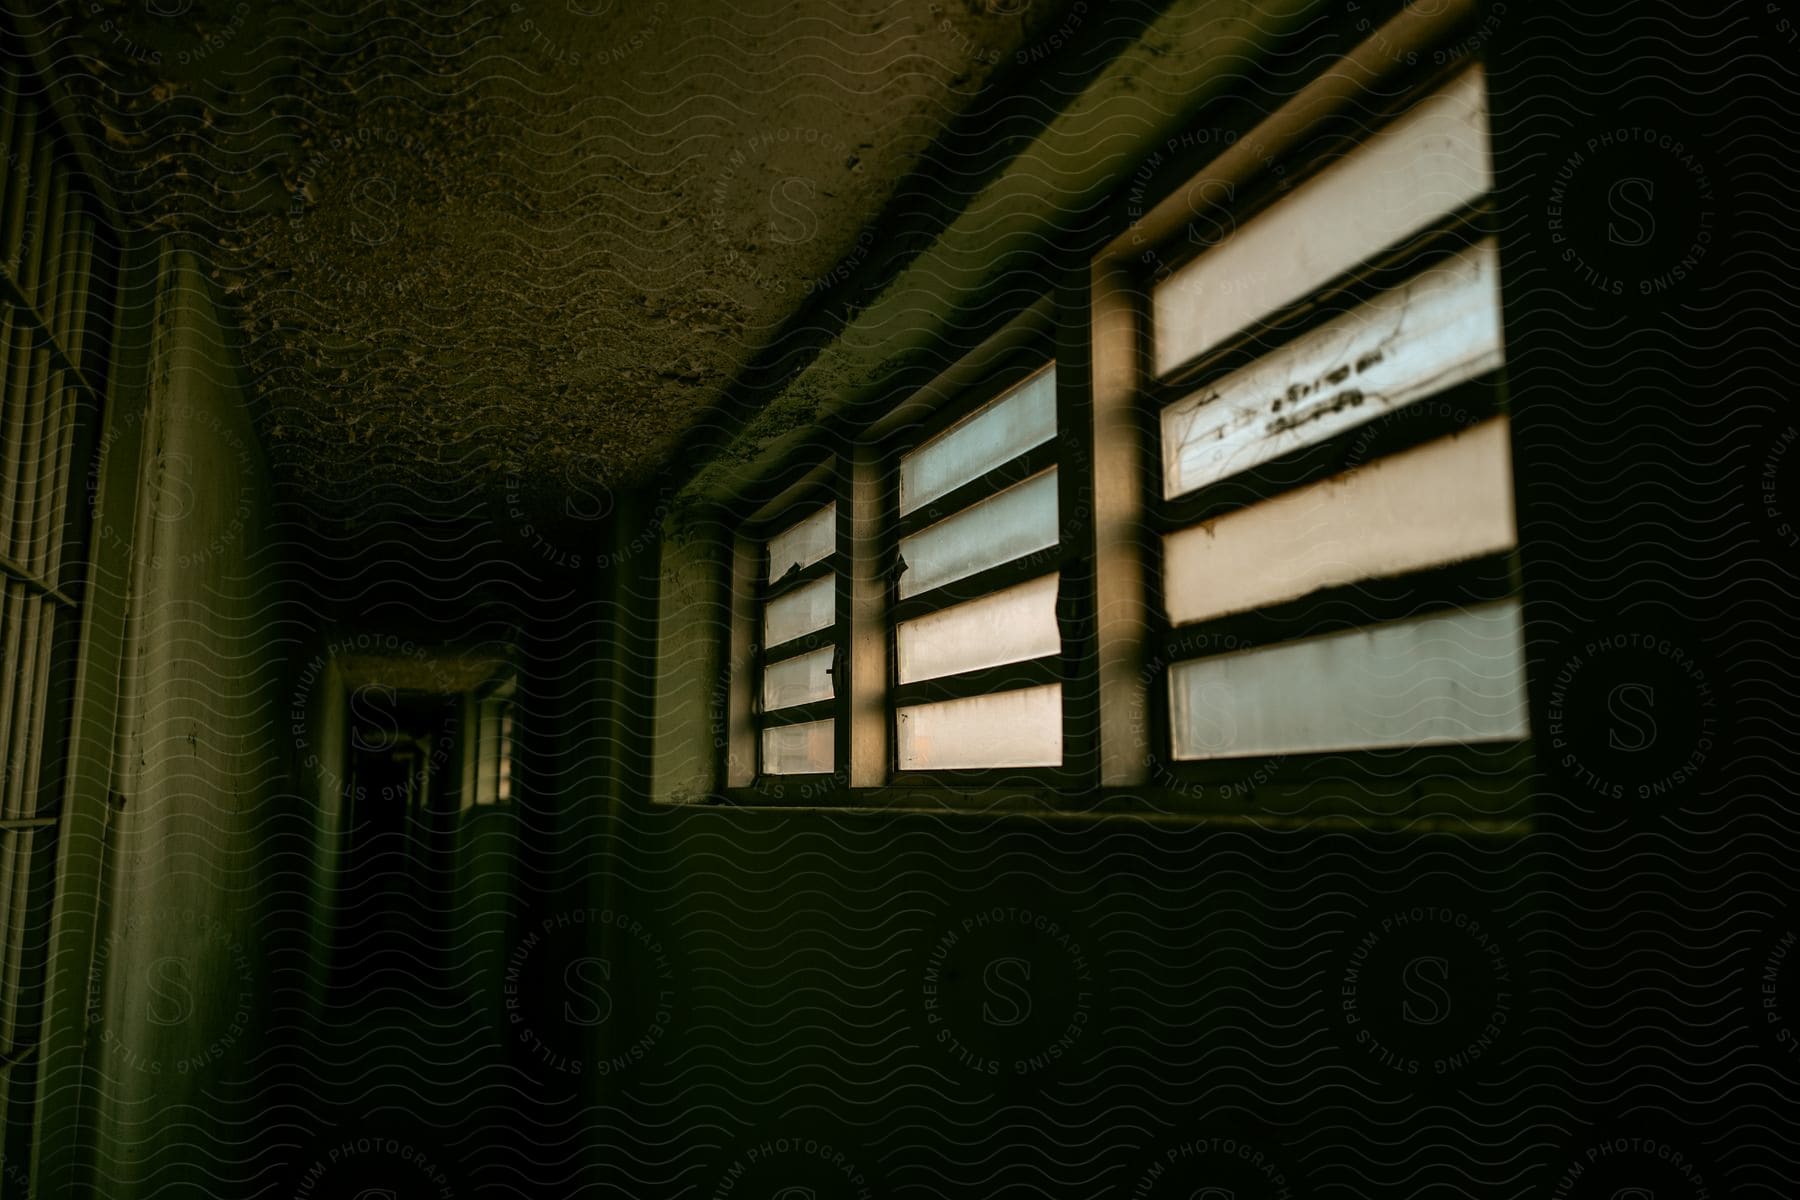 Dark interior of a building with small windows and a dirty environment